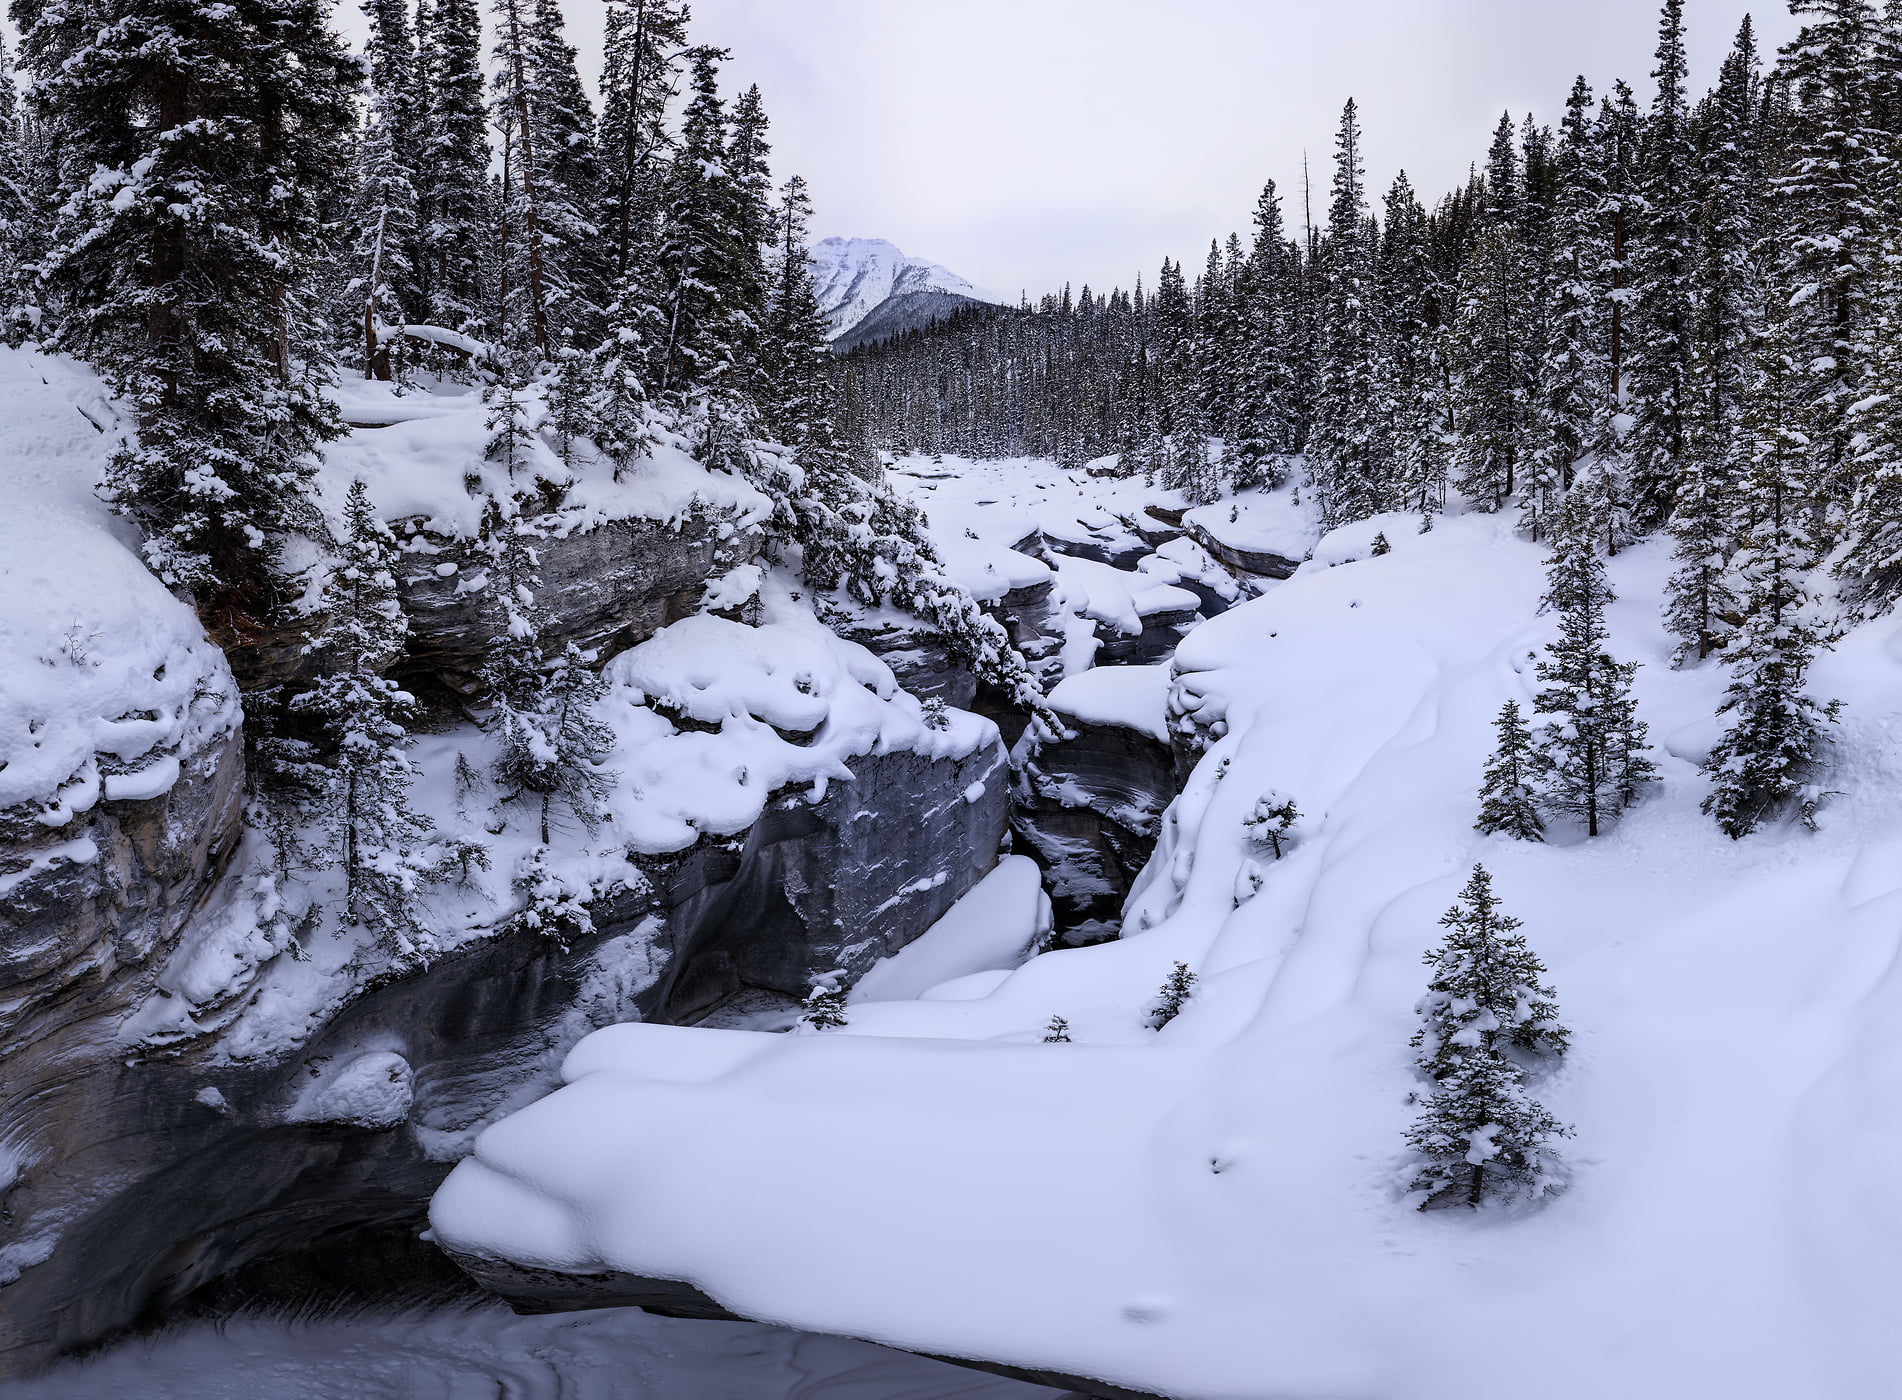 1,148 megapixels! A very high resolution, large-format VAST photo print of a snowy winter scene with evergreen trees coated in fresh snow; fine art nature photograph created by Scott Dimond in Mistaya Canyon, Banff National Park, Alberta, Canada.